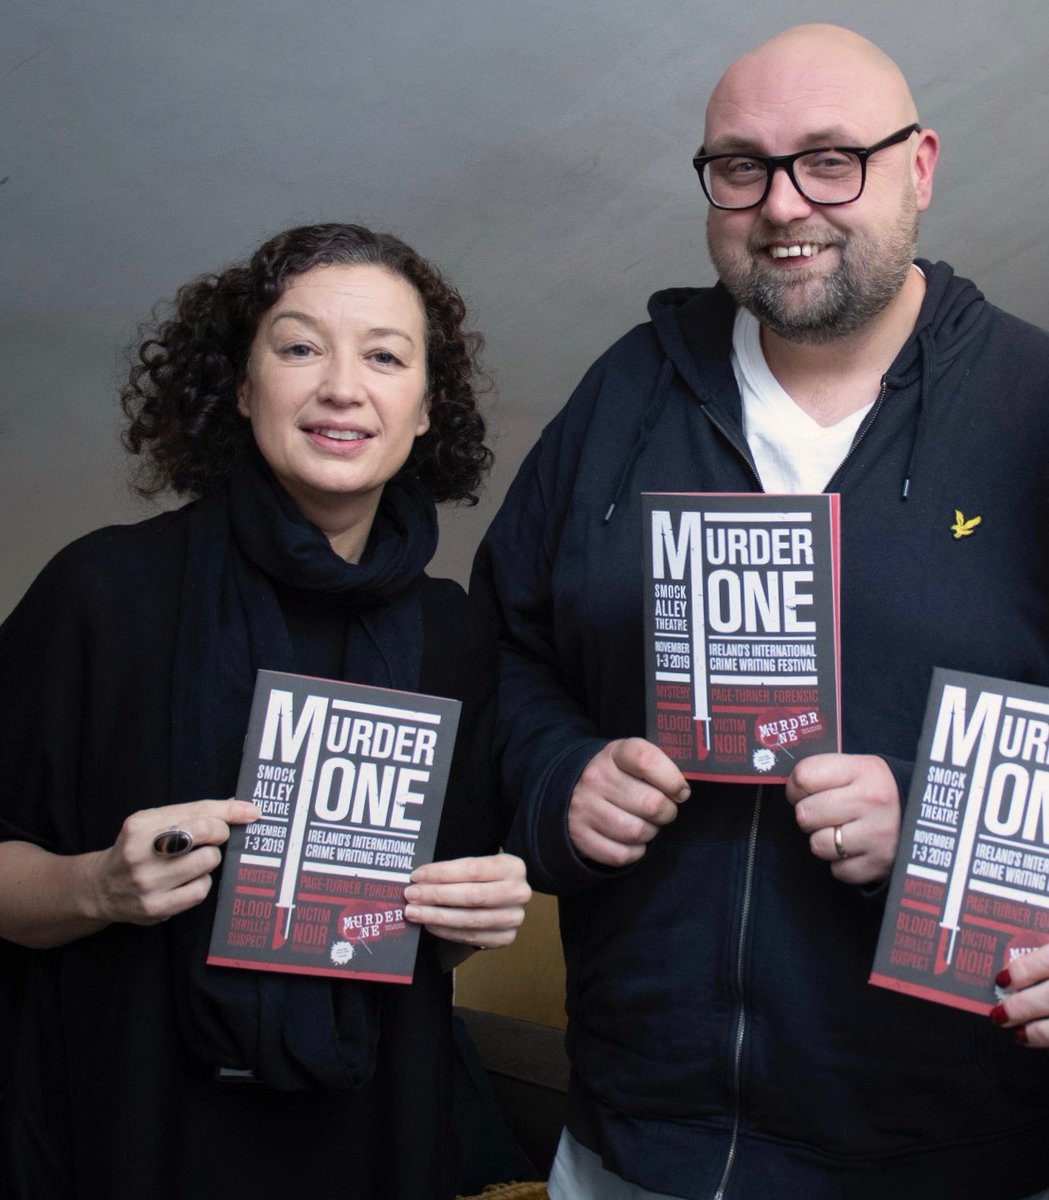 “The Body Falls” by  @andysaibhcarter ( @LittleBrownUK) & “Fifty Fifty” by  @SSCav ( @orionbooks), taken before their panel event together at  @MurderOneFest last November.